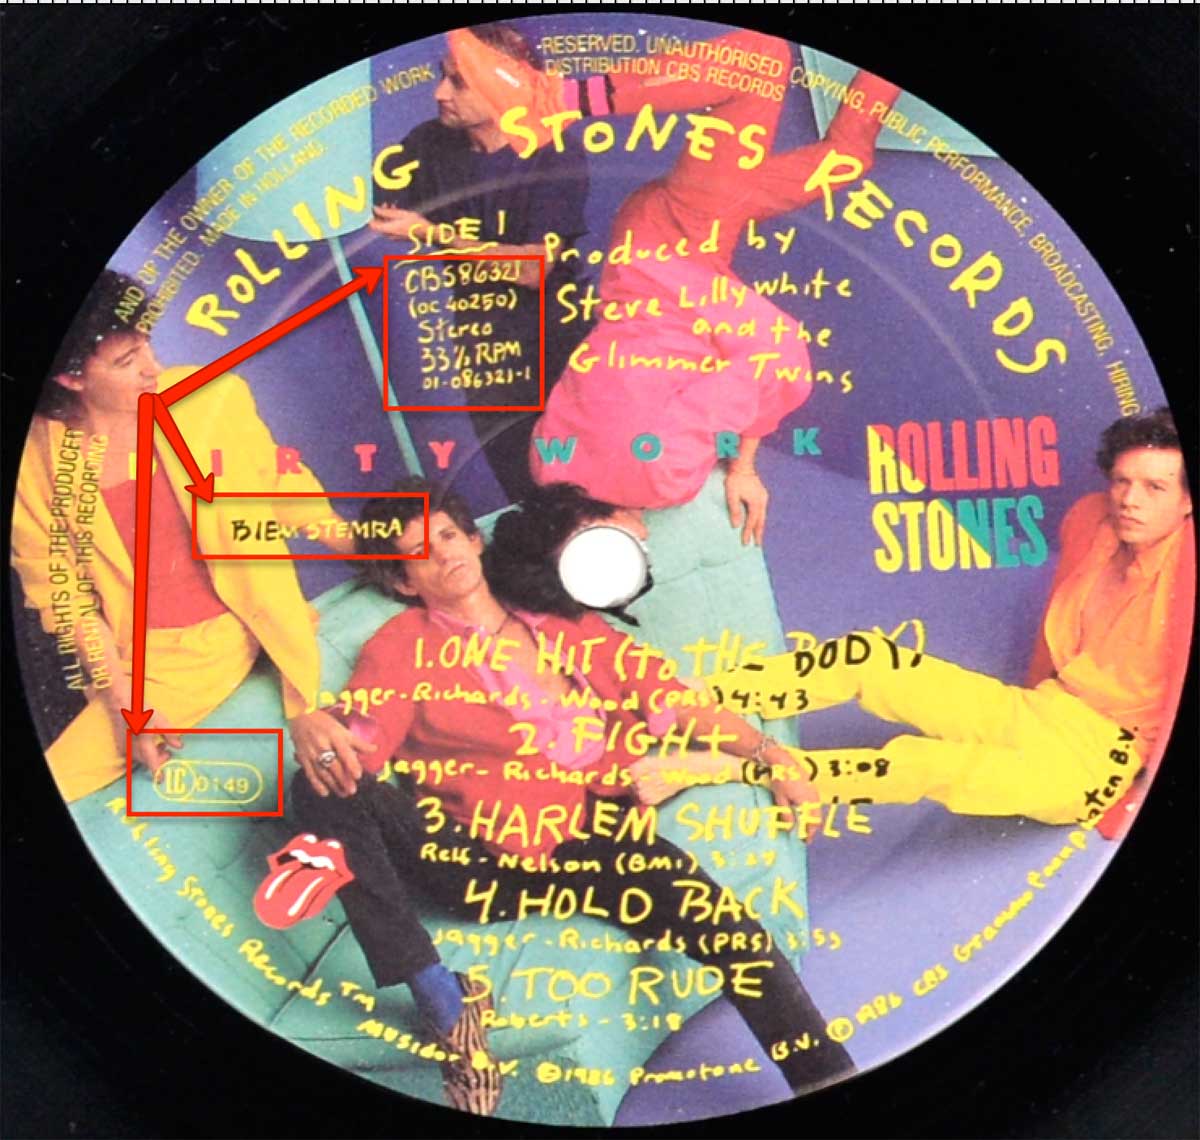 Enlarged & Zoomed photo of "ROLLING STONES Dirty Work" Record's Label